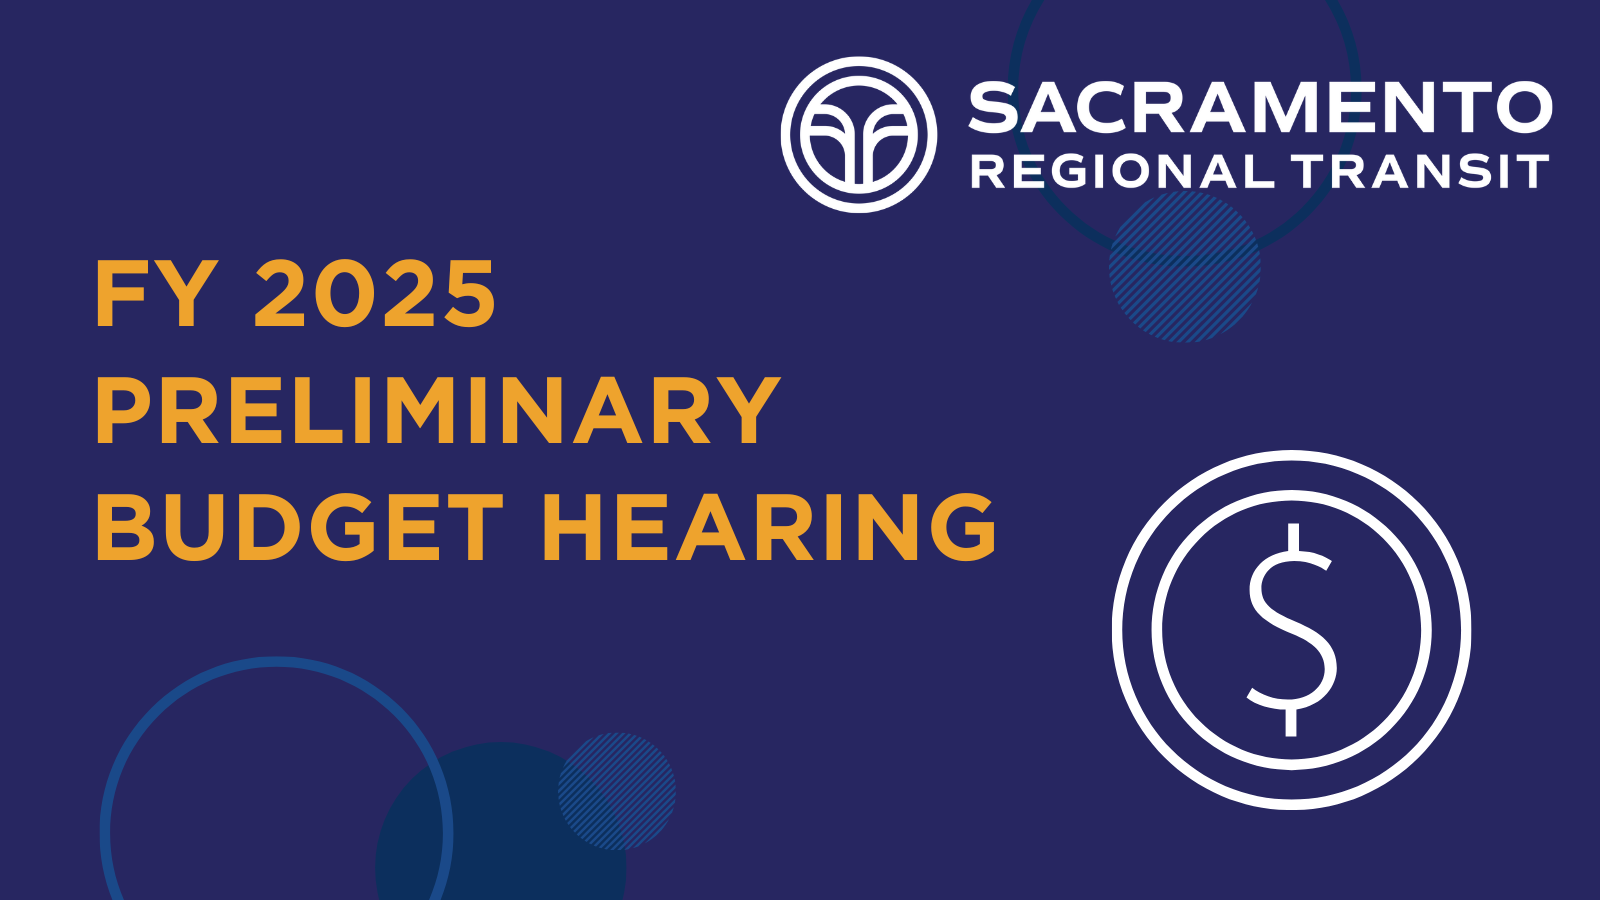 FY 2025 Preliminary budget hearing